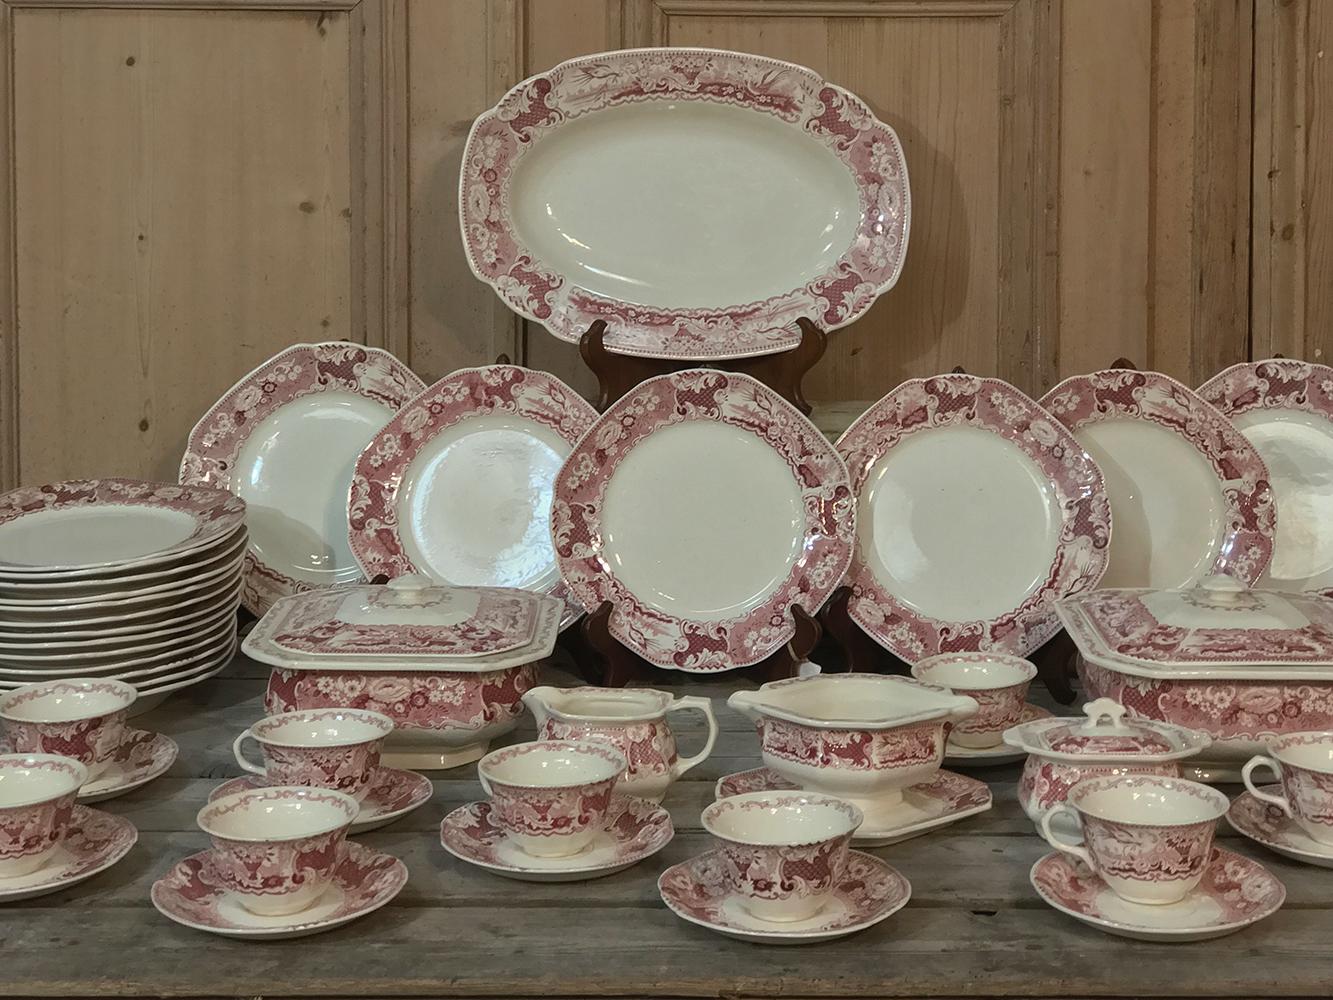 Porcelain Antique Pink & White 65 Pc. China Set by Maestricht ~ Victoria Pattern For Sale